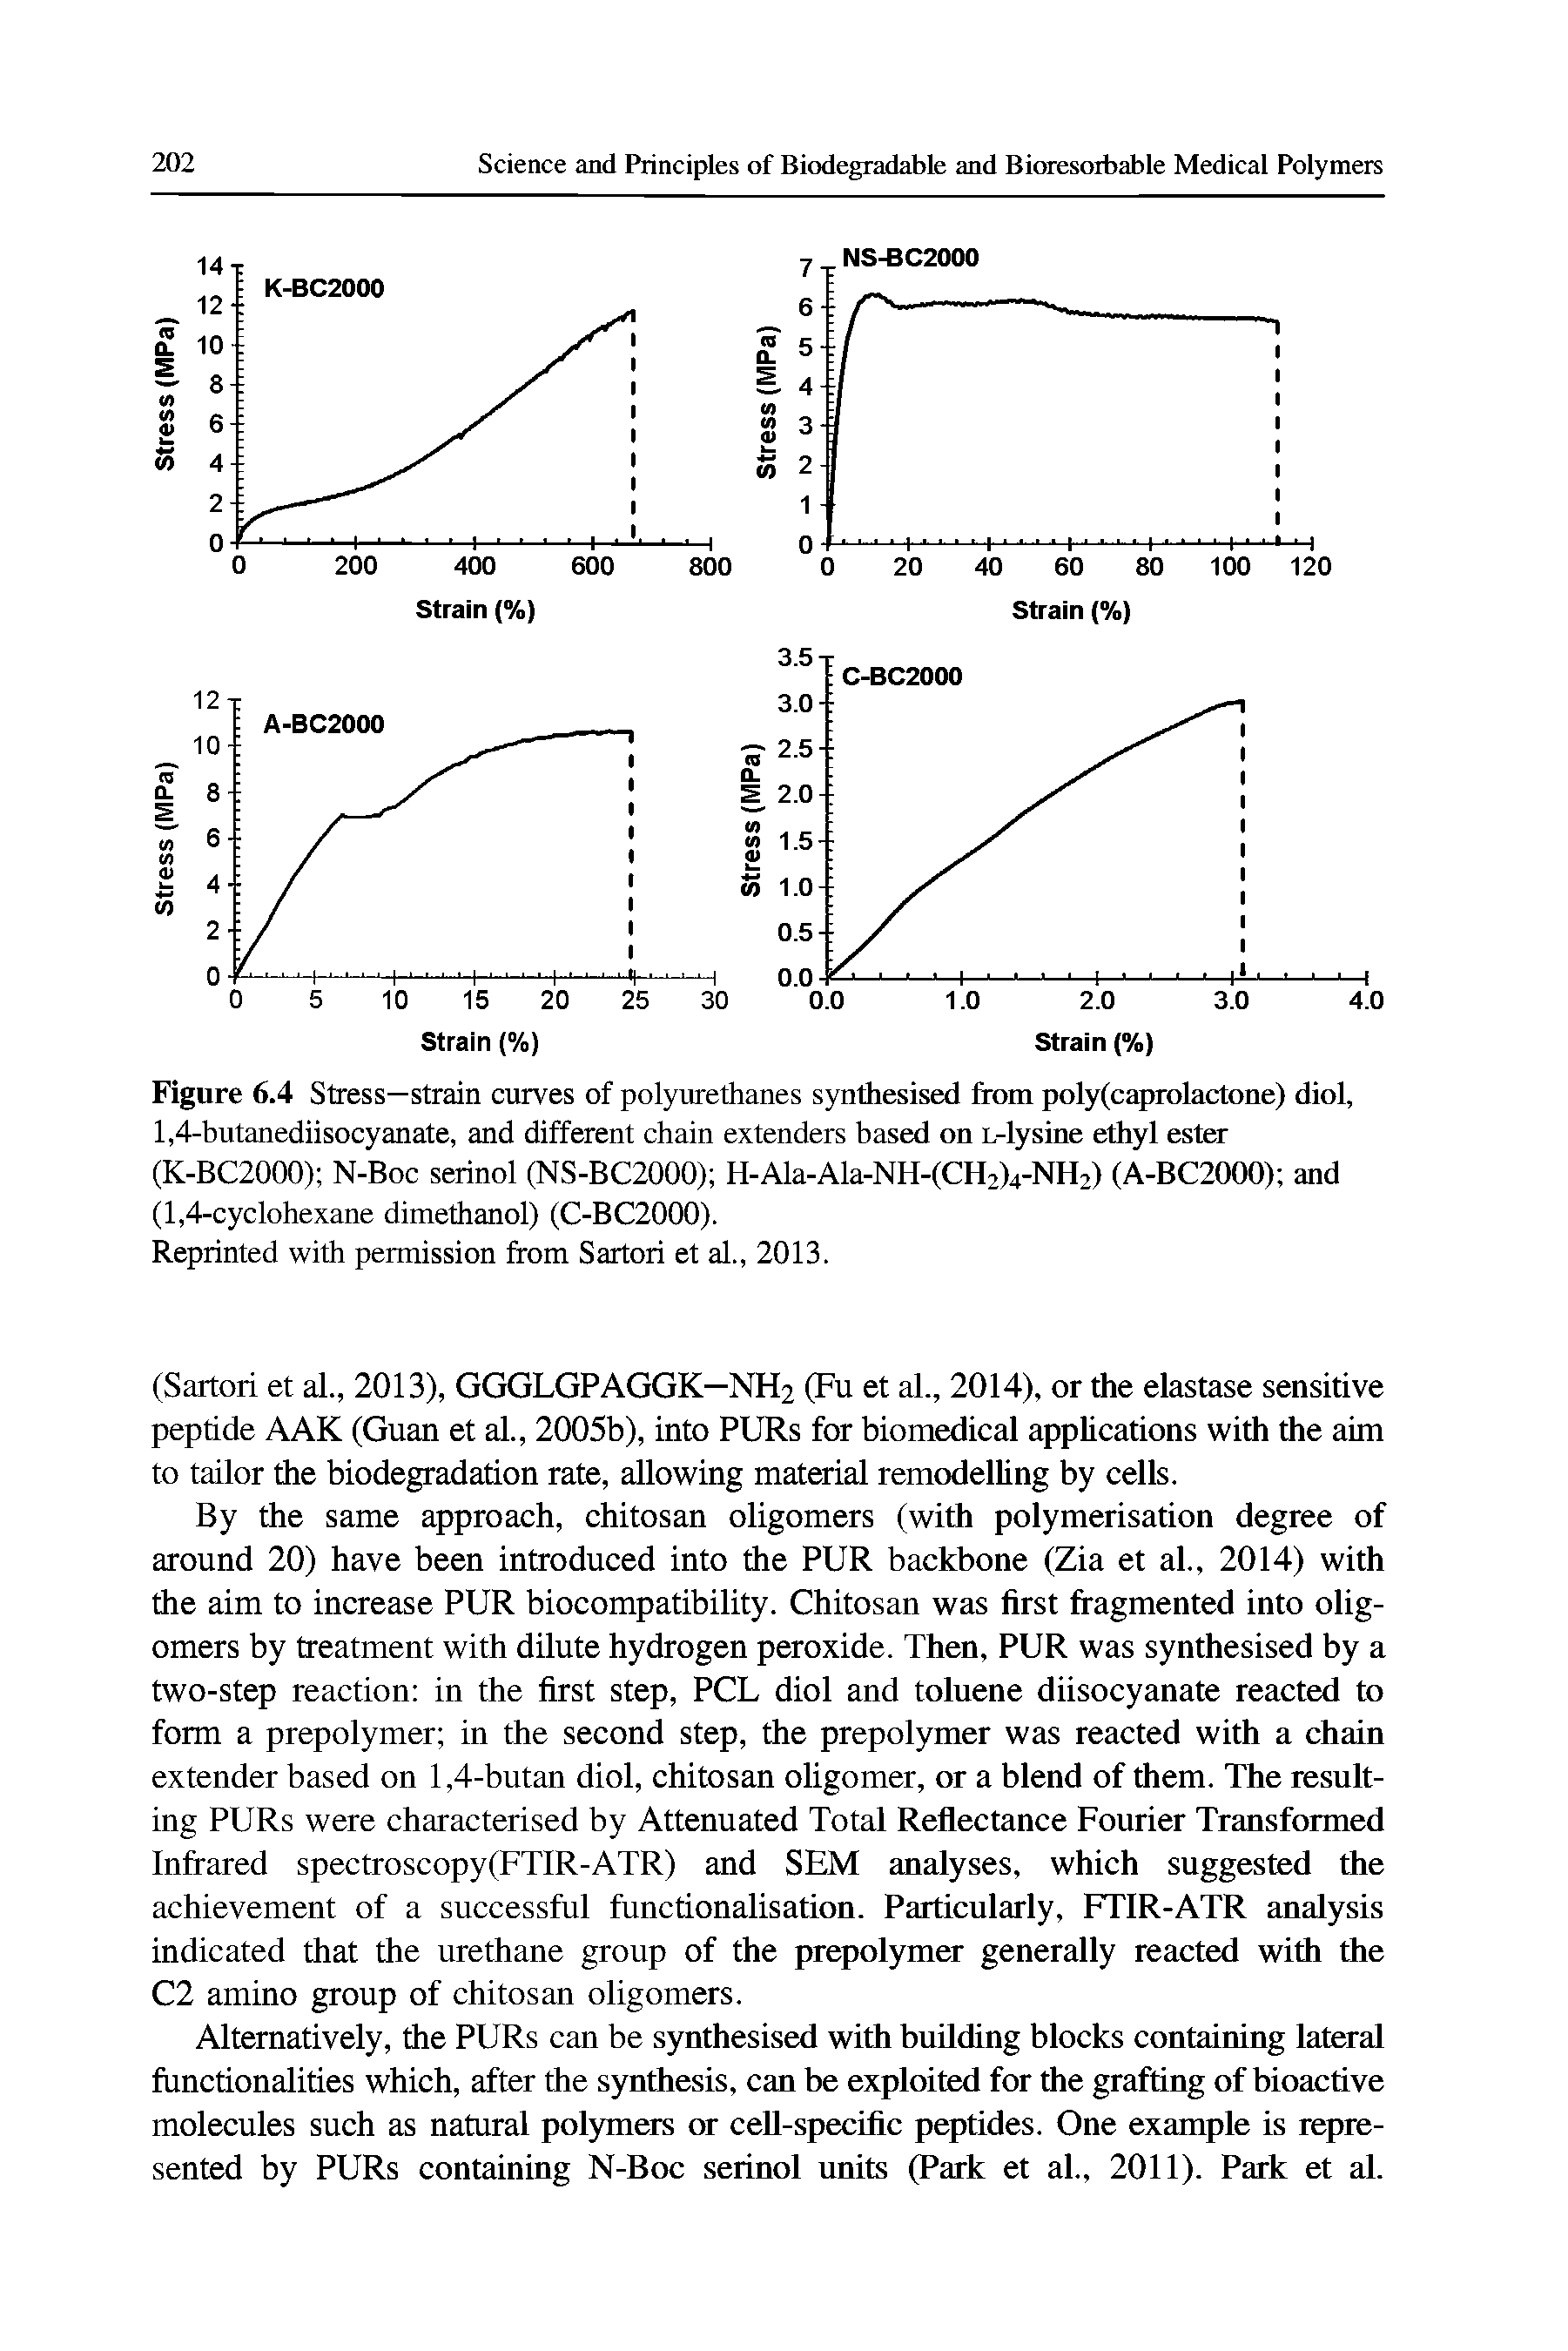 Figure 6.4 Stress—strain curves of polyurethanes synthesised from poiy(caproiactone) dioi, 1,4-butanediisocyanate, and different chain extenders based on L-iysine ethyi ester (K-BC2000) N-Boc serinol (NS-BC2000) H-Ala-Ala-NH-(CH2)4-NH2) (A-BC2000) and (1,4-cyclohexane dimethanol) (C-BC2000).